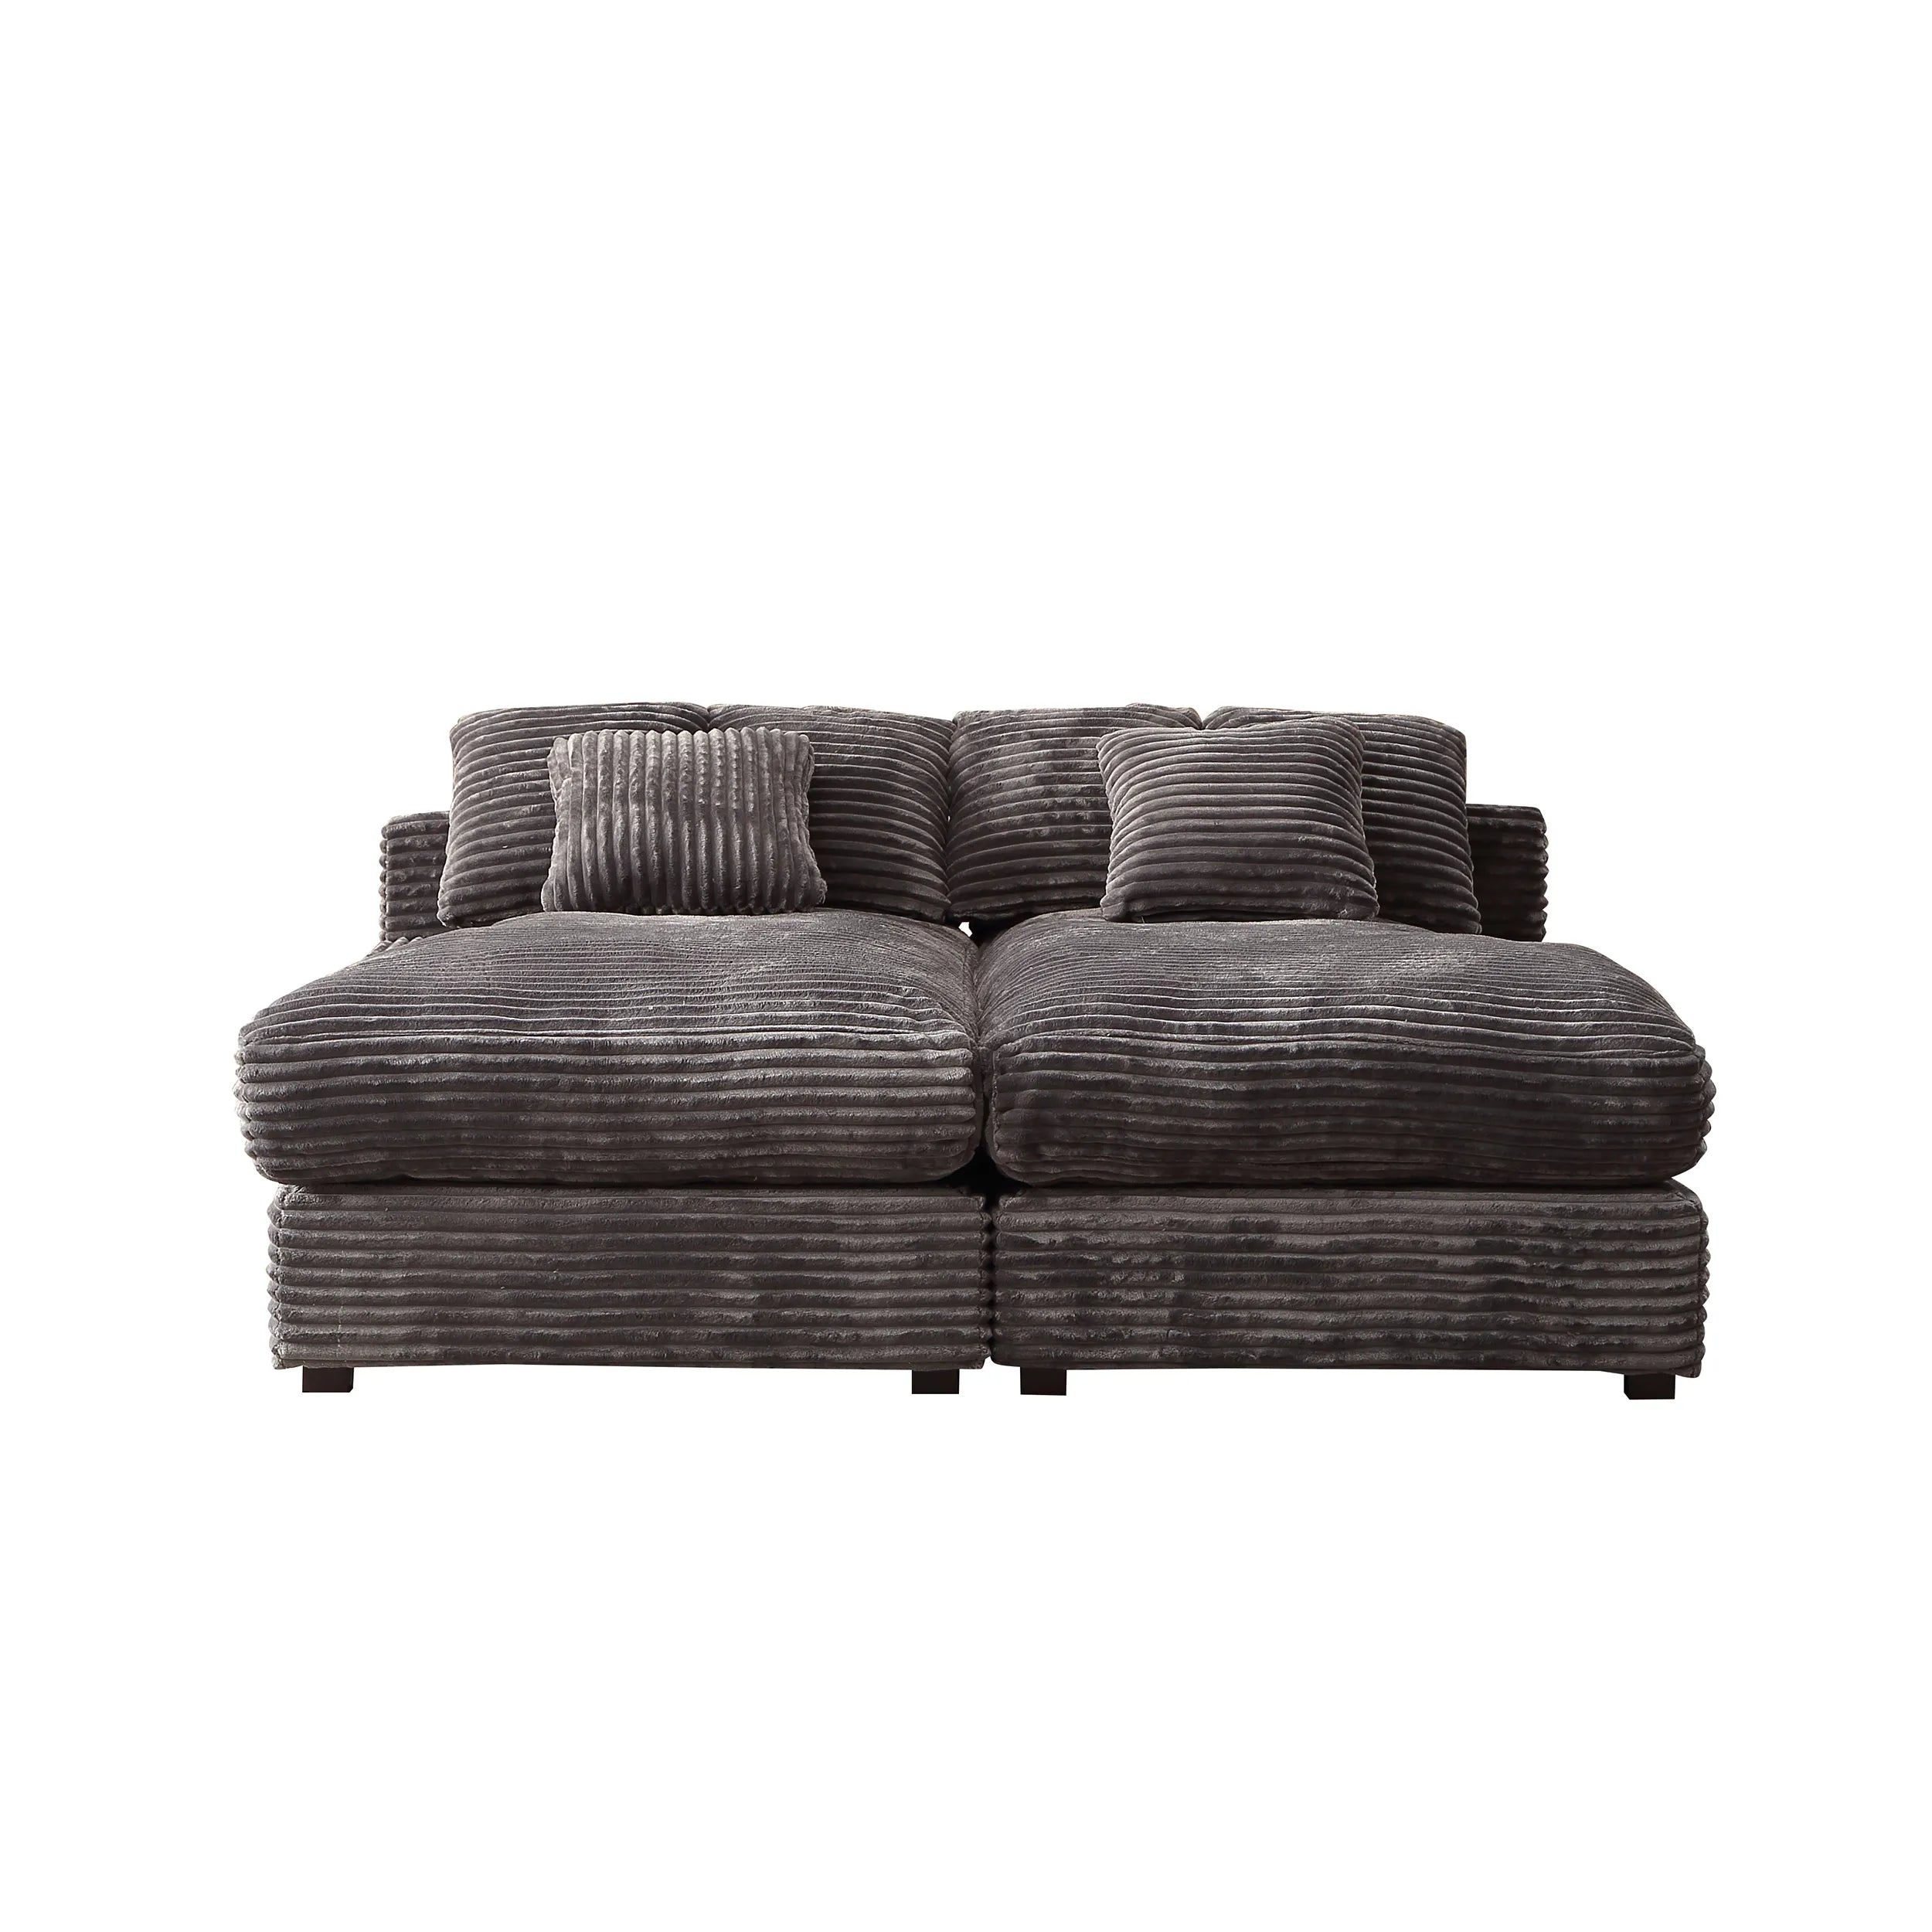 Louie Corduroy Sectional Sofa, Deep Seat Double Chaise Couch - Gray